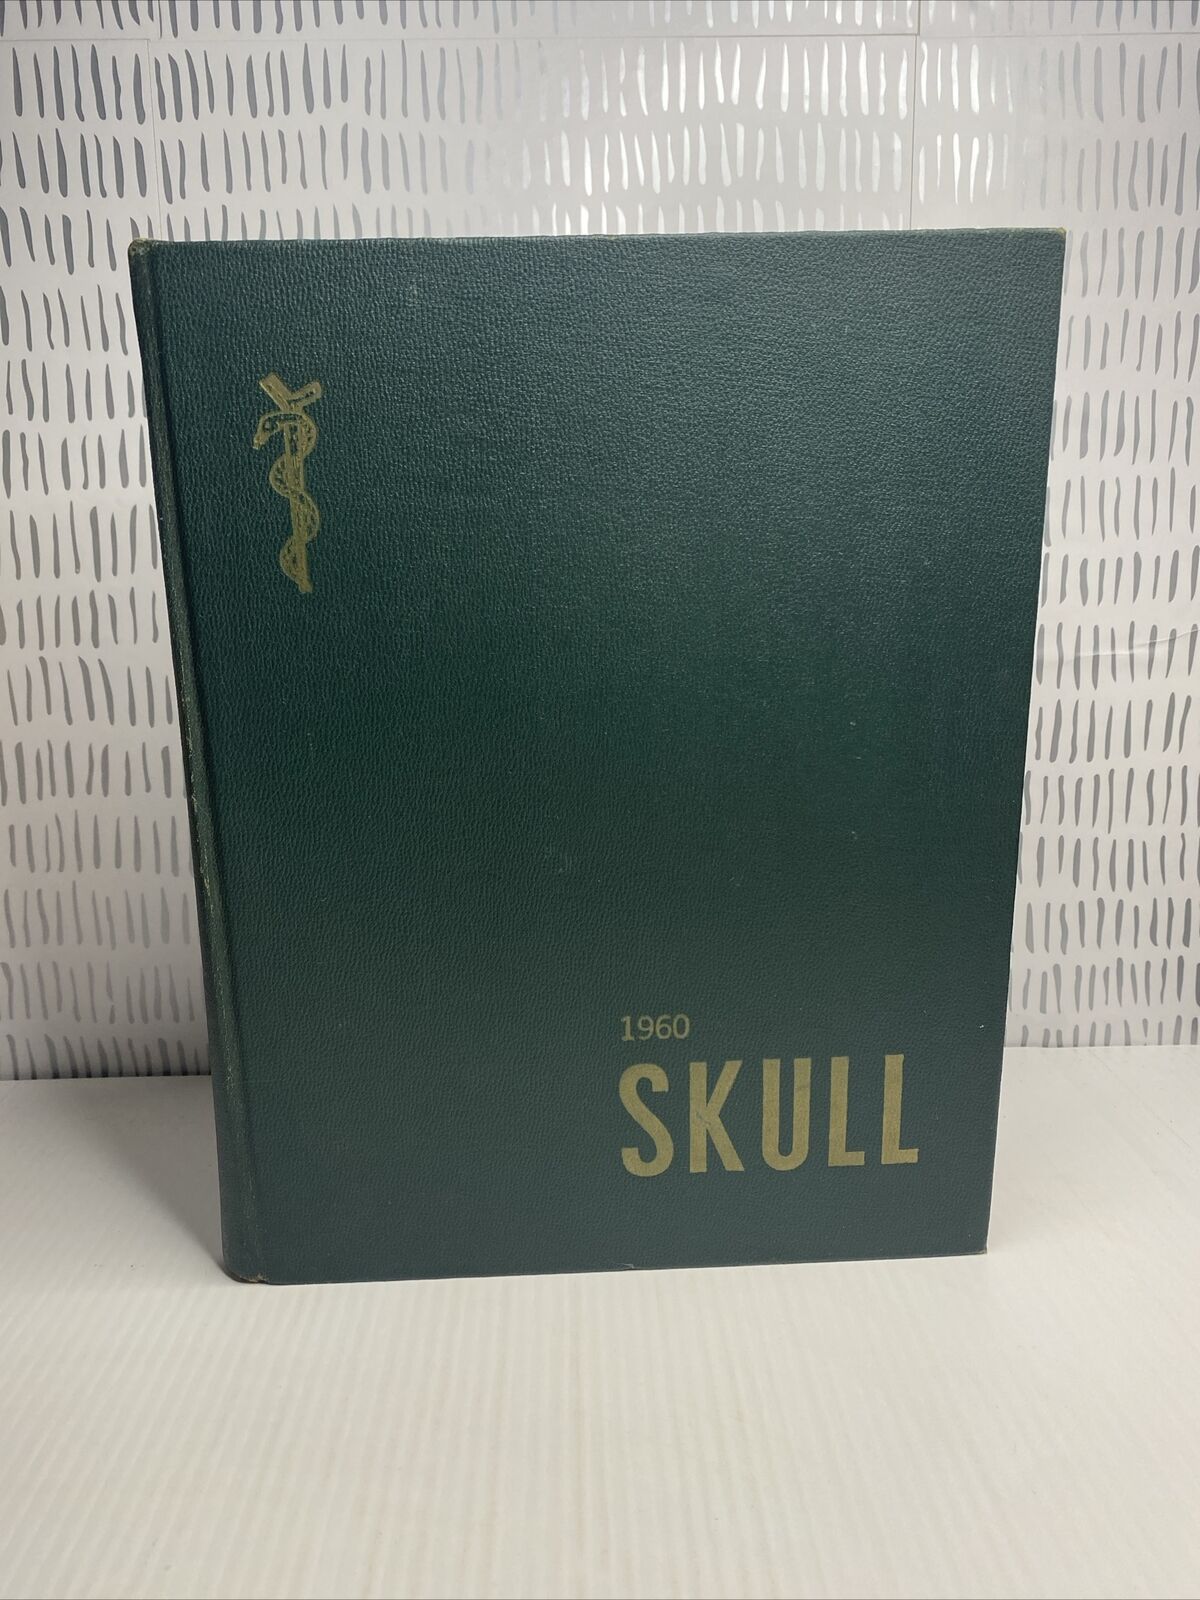 College Yearbook Albany Medical College Albany New York Skull 1960